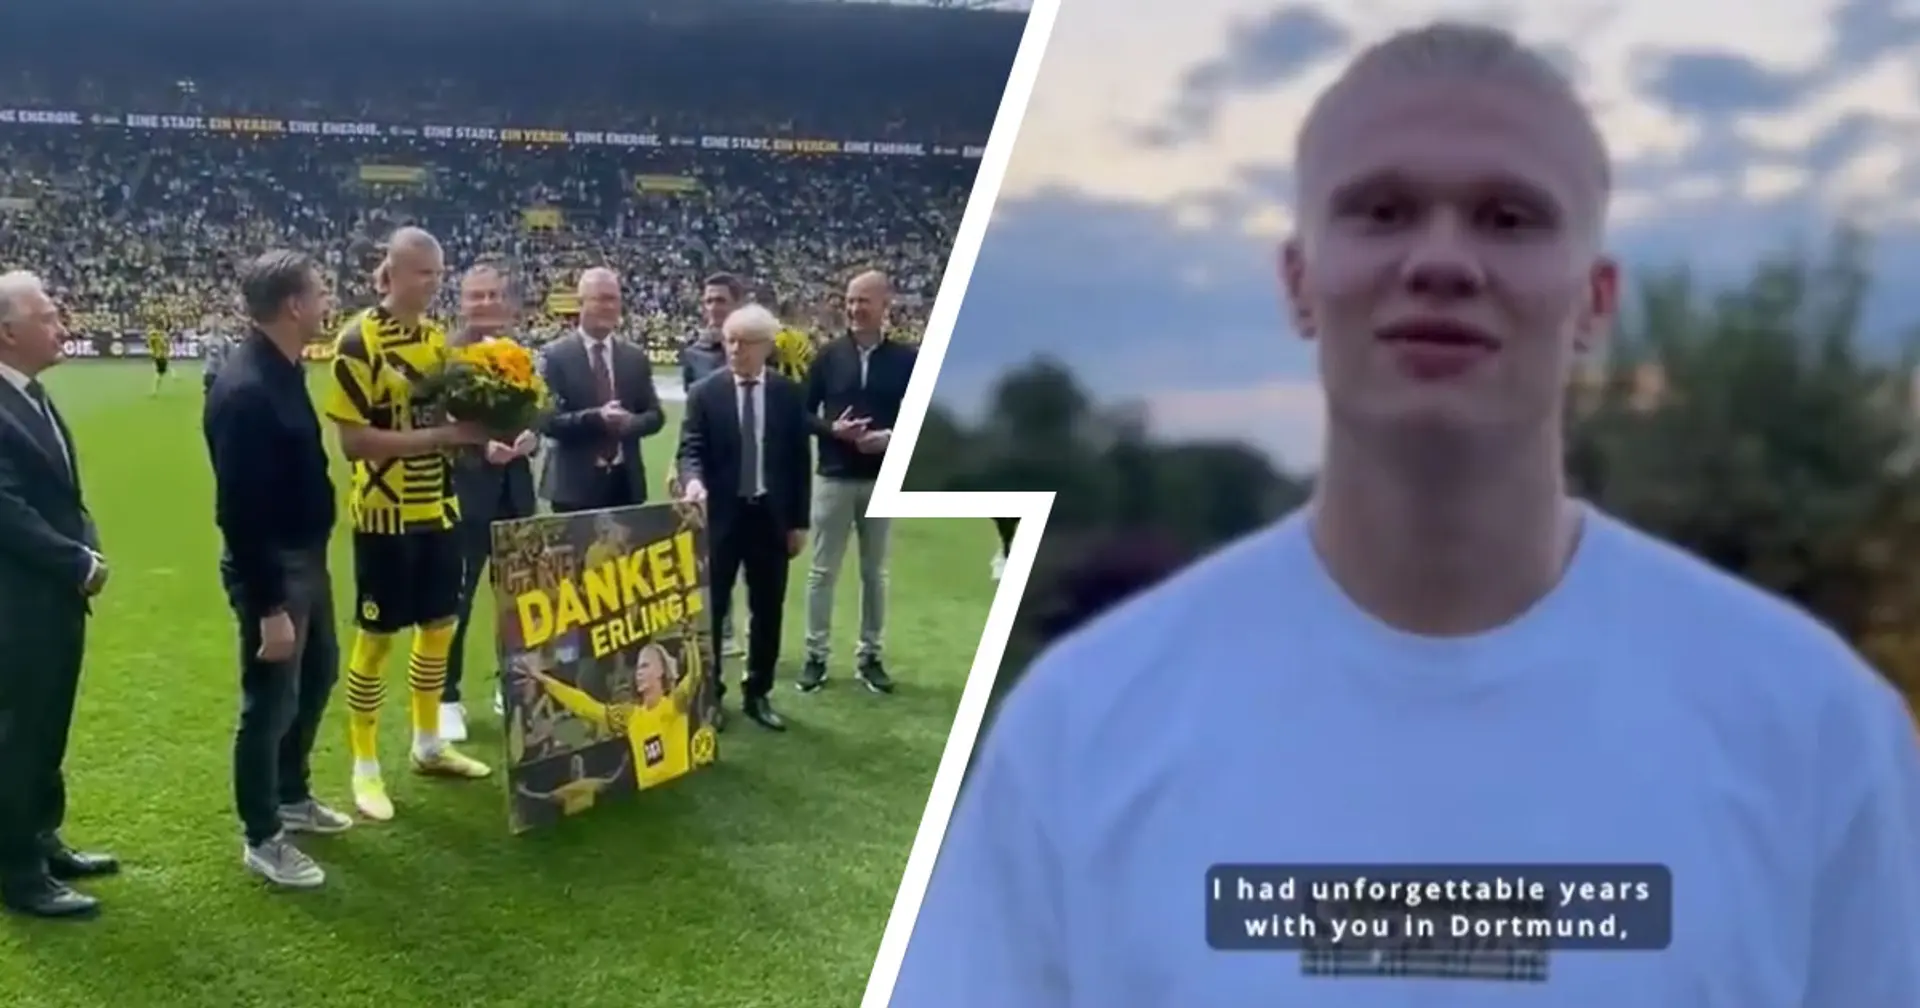 'It's been an honour to wear this shirt’: Erling Haaland pens emotional farewell to Borussia Dortmund